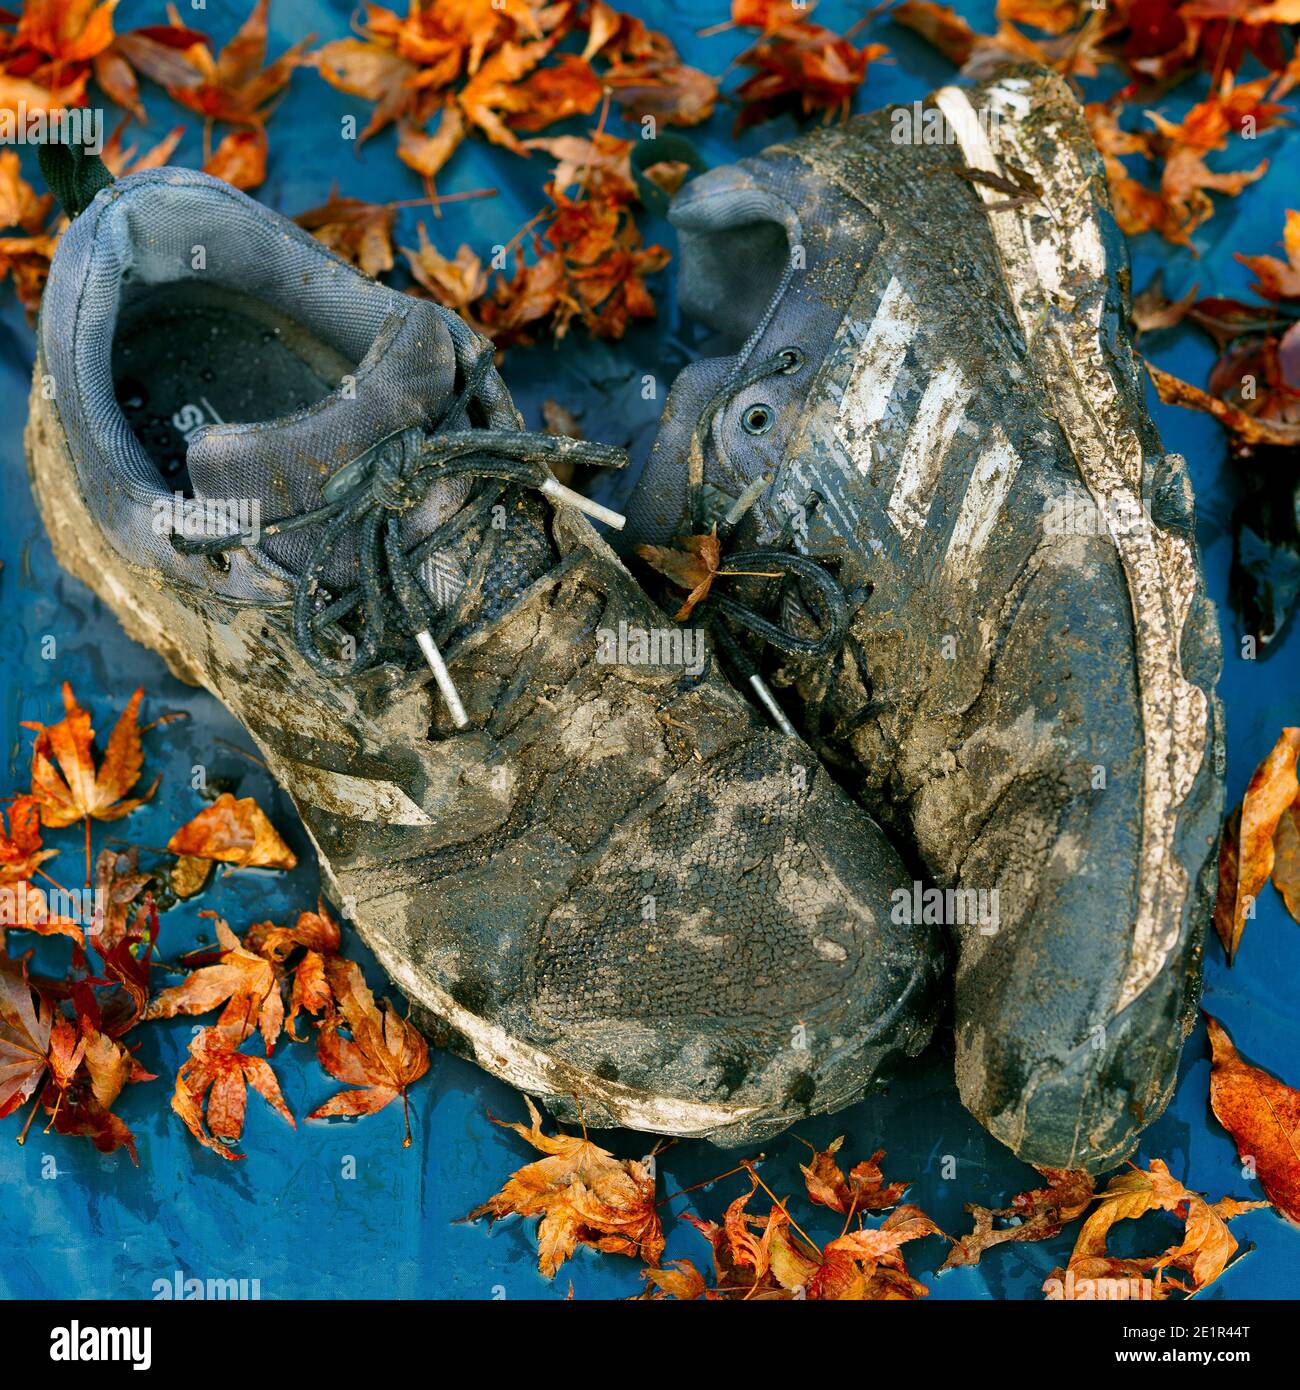 Men's Muddy Adidas Running Shoes, Dirty Adidas Training Shoes. Surrounded by Autumn leaves. Trail Shoes Photo - Alamy